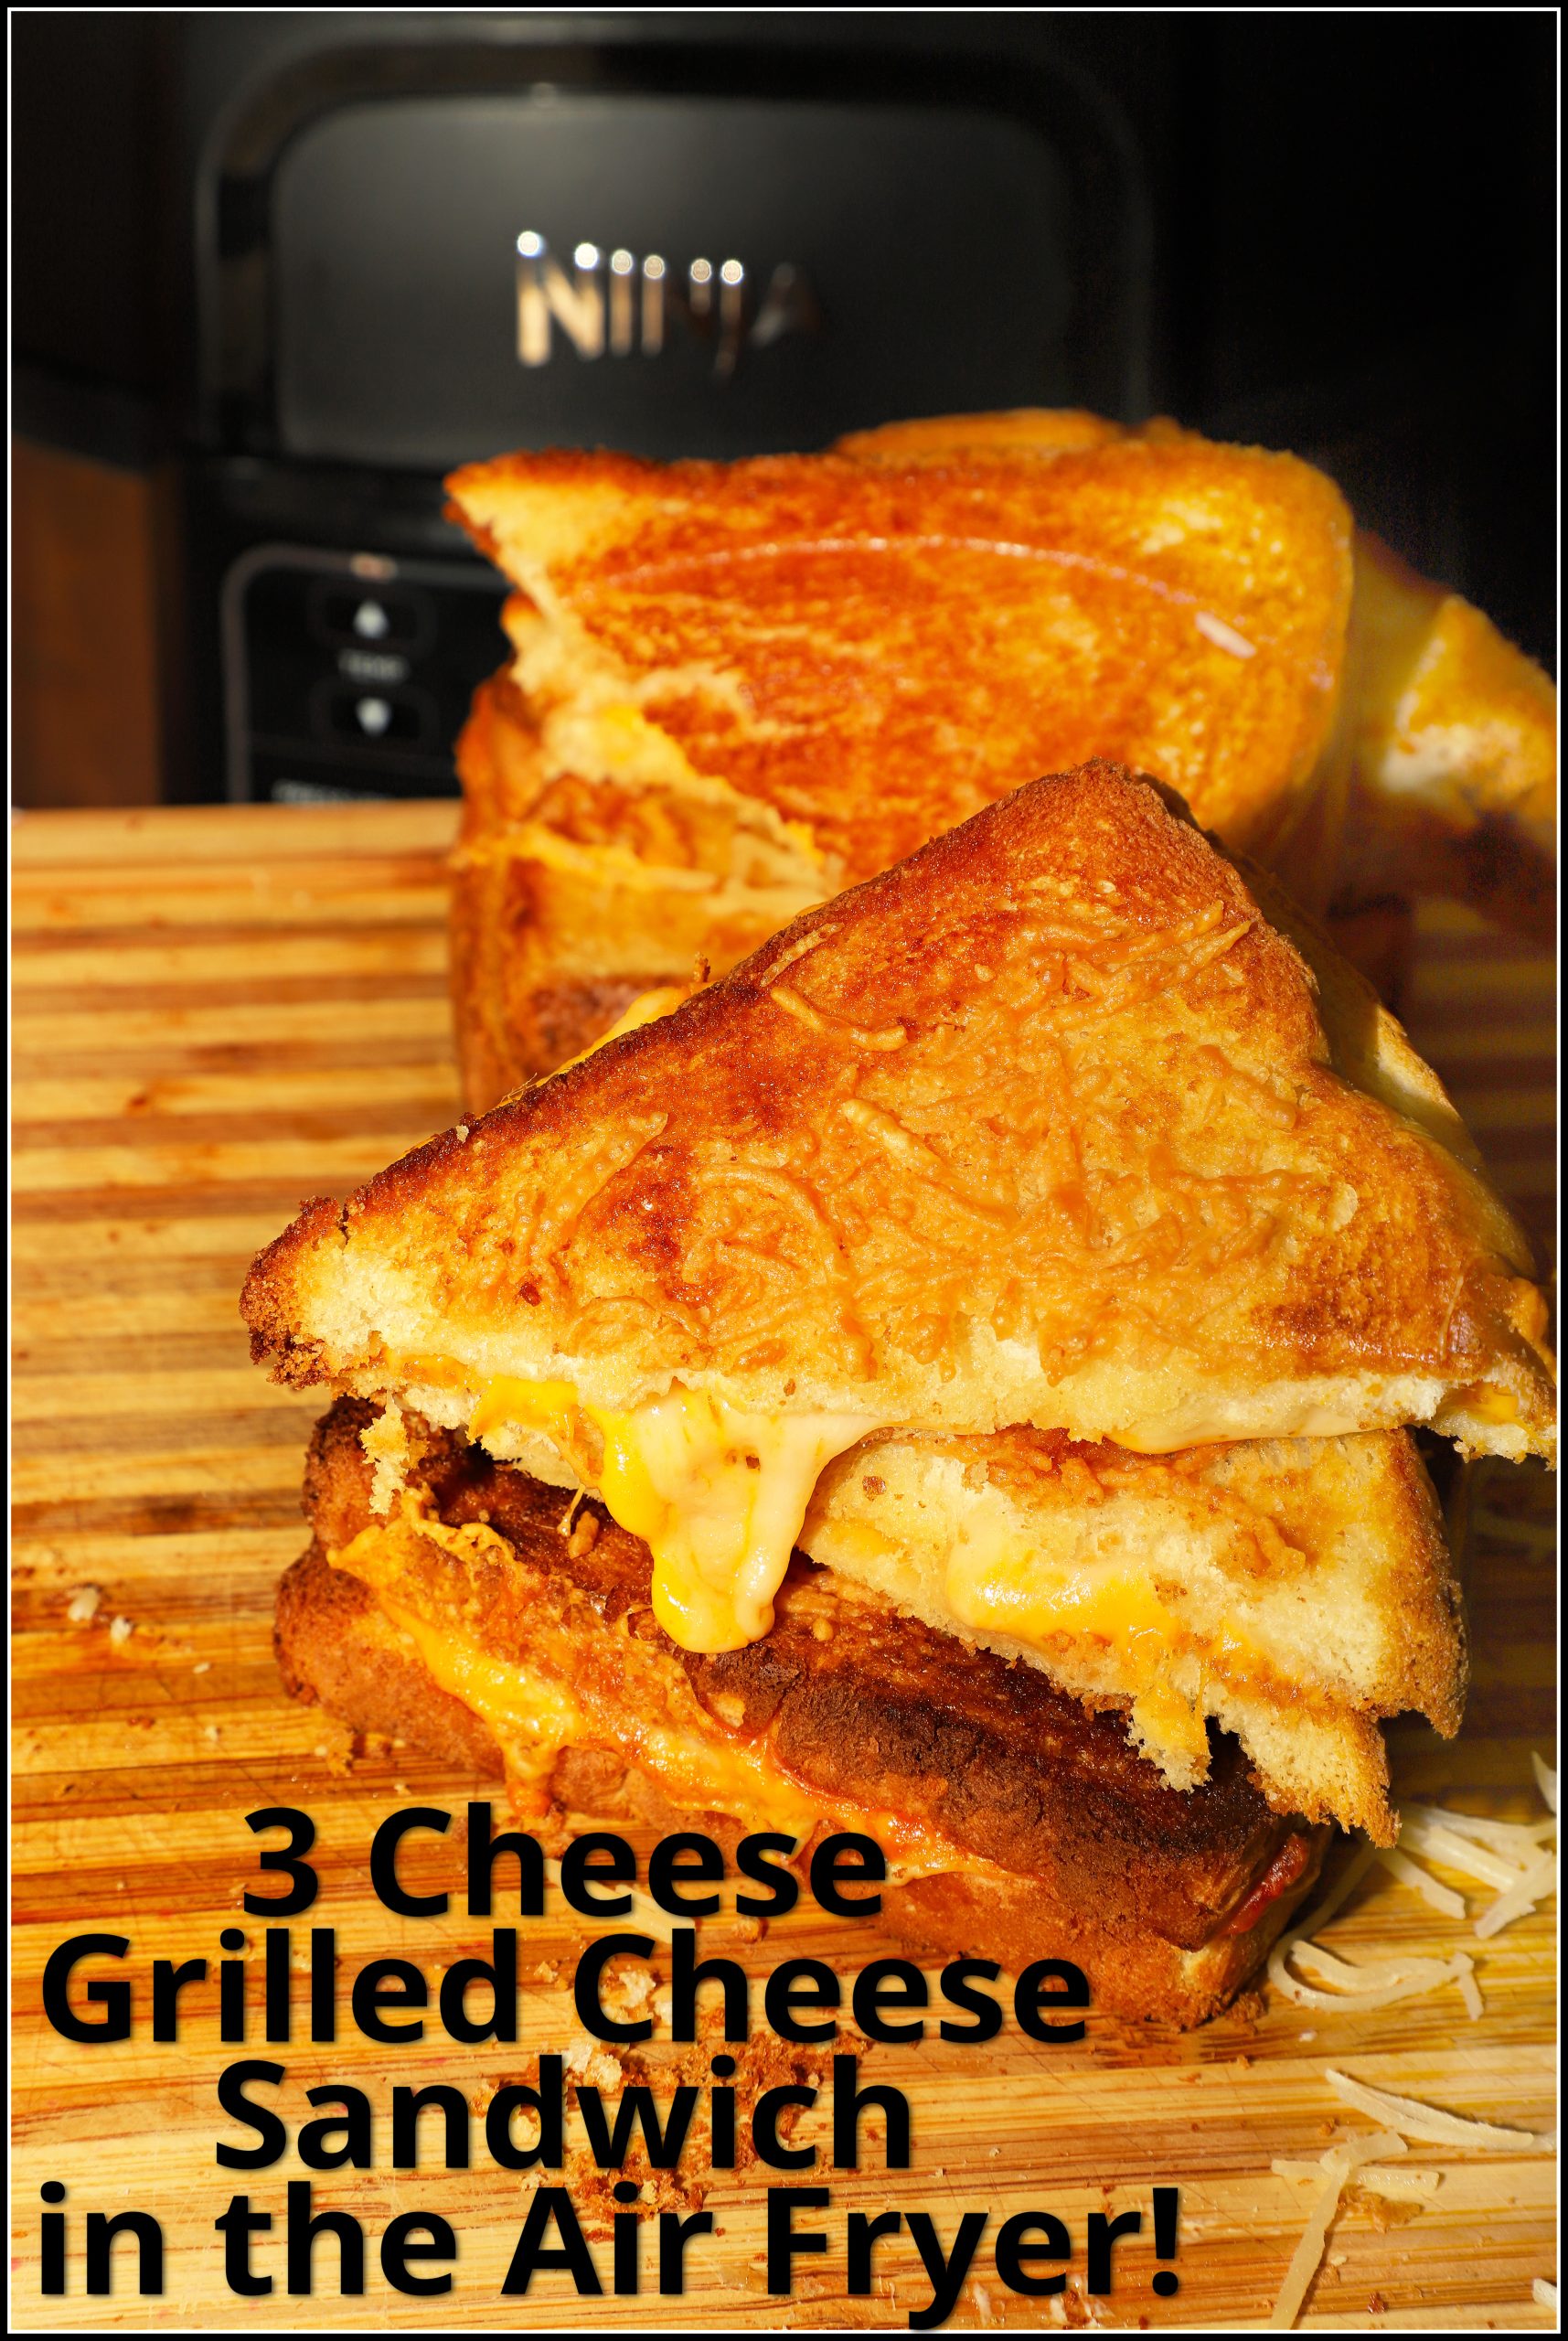 3 Cheese Grilled Cheese Sandwich - in the Air Fryer!